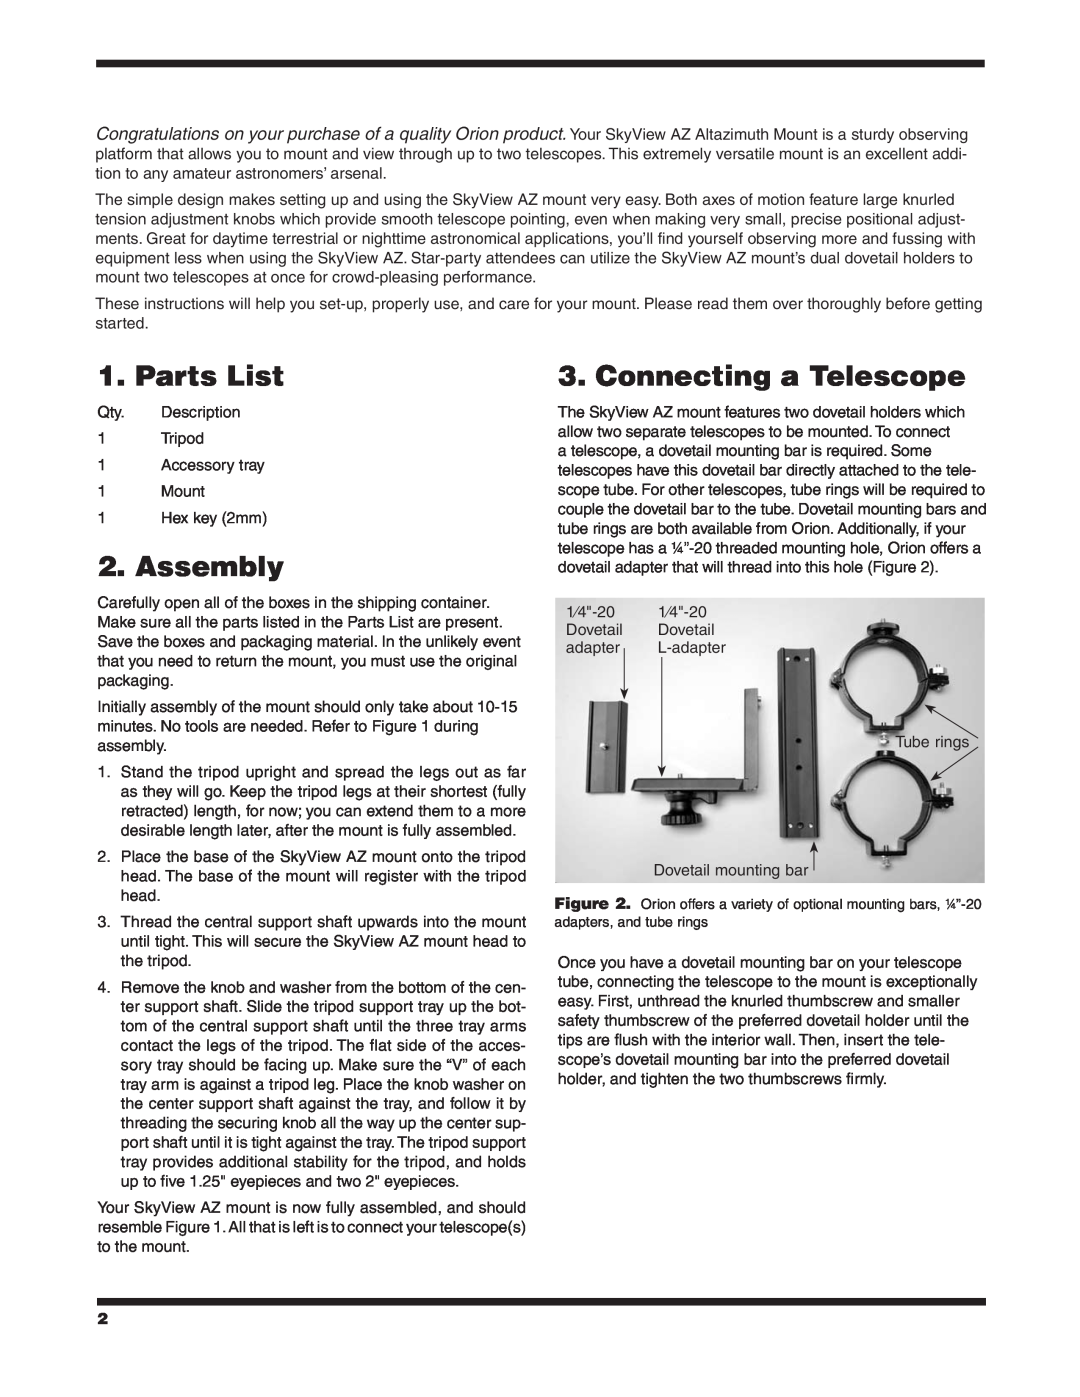 Orion 9017 instruction manual Parts List, Assembly, Connecting a Telescope 